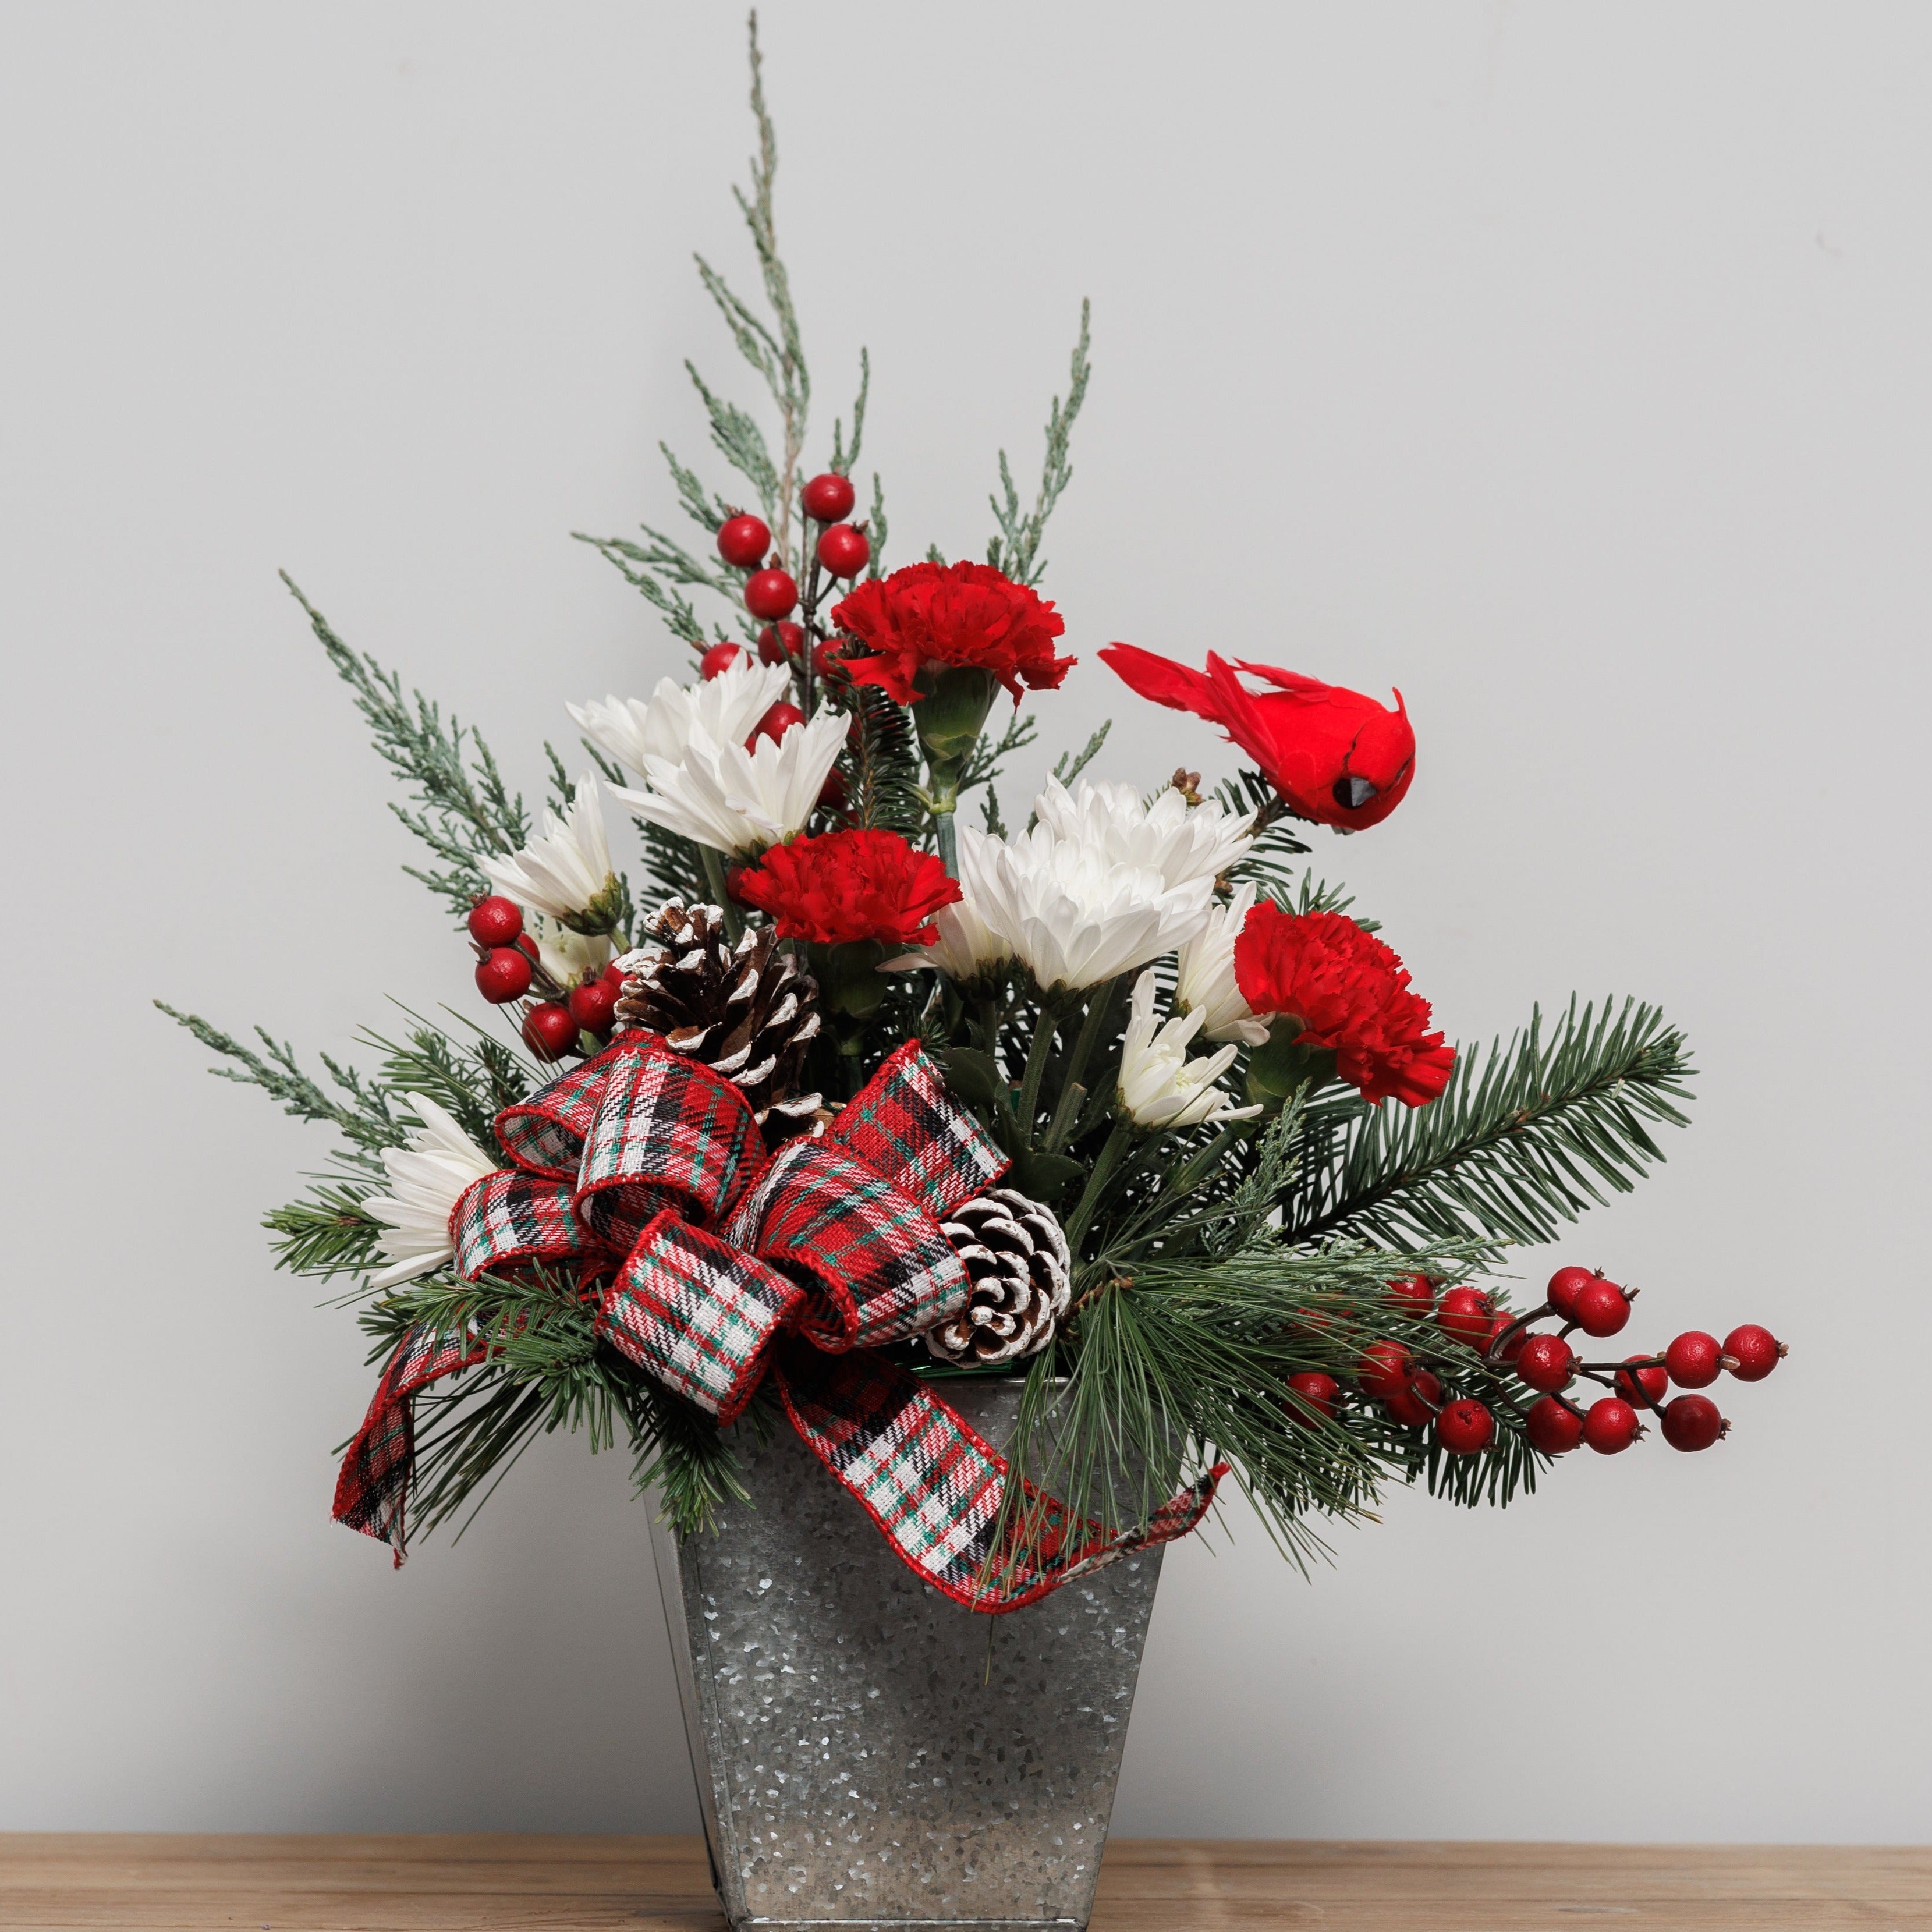 A red and white flower arrangement with pine cones and cardinal pick in a galvanized tin container.